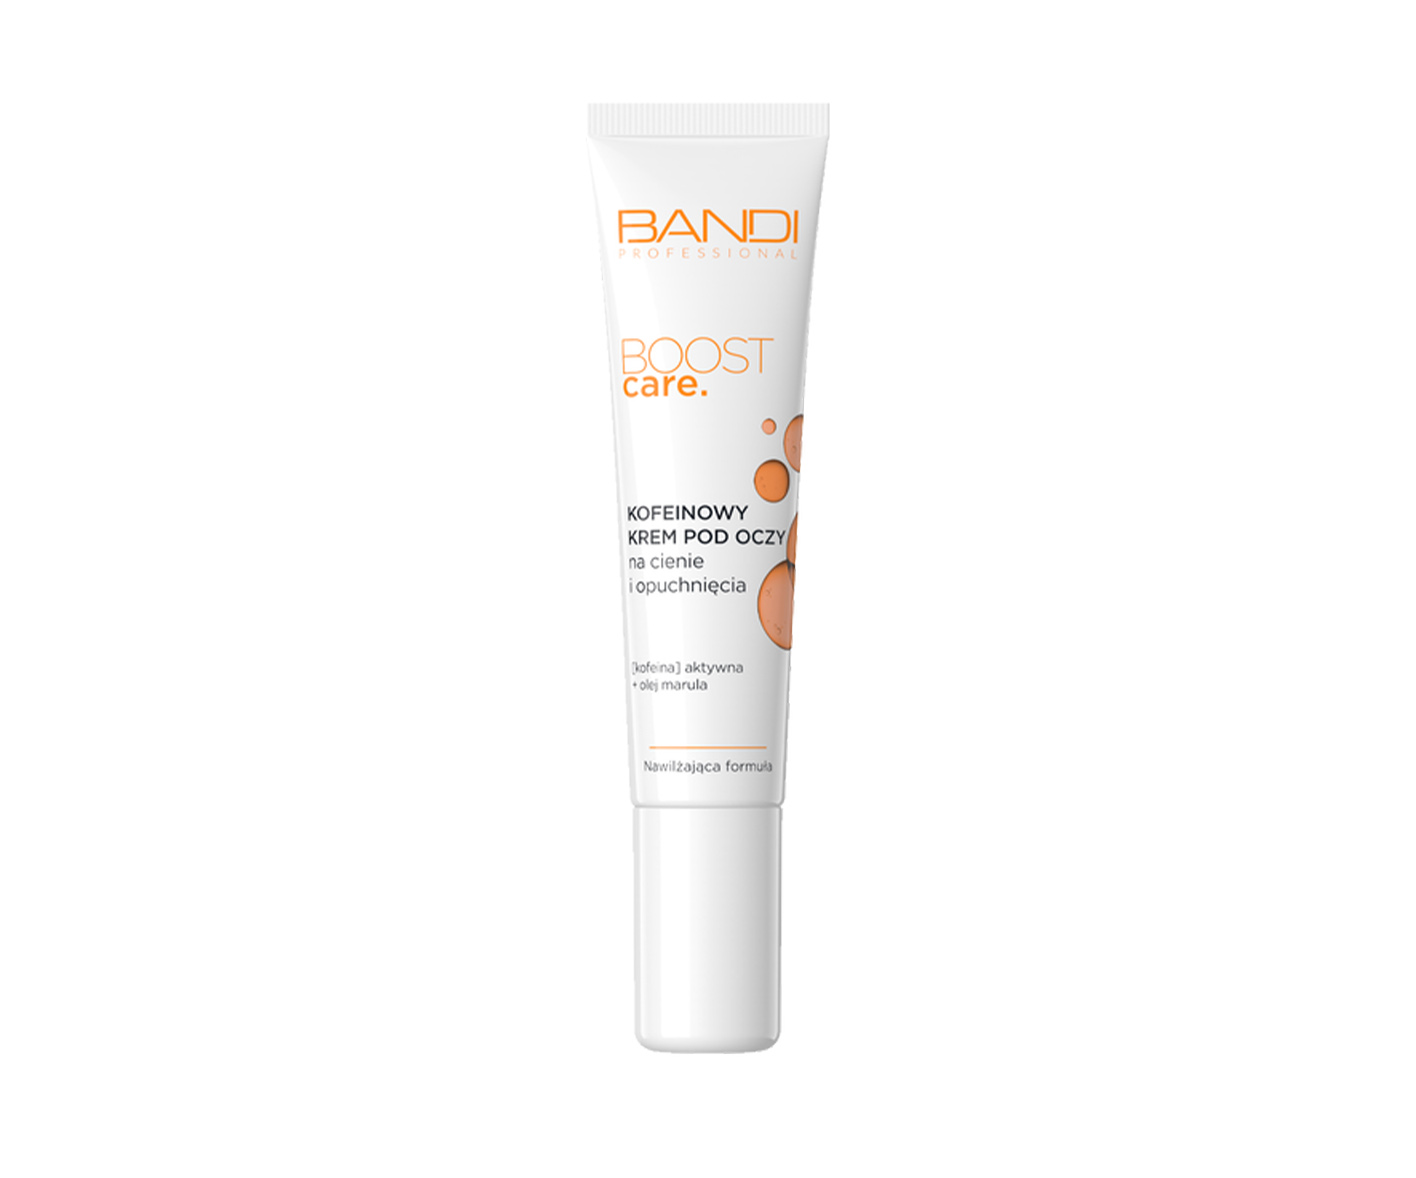 Bandi, Boost Care, eye cream for dark circles and puffiness